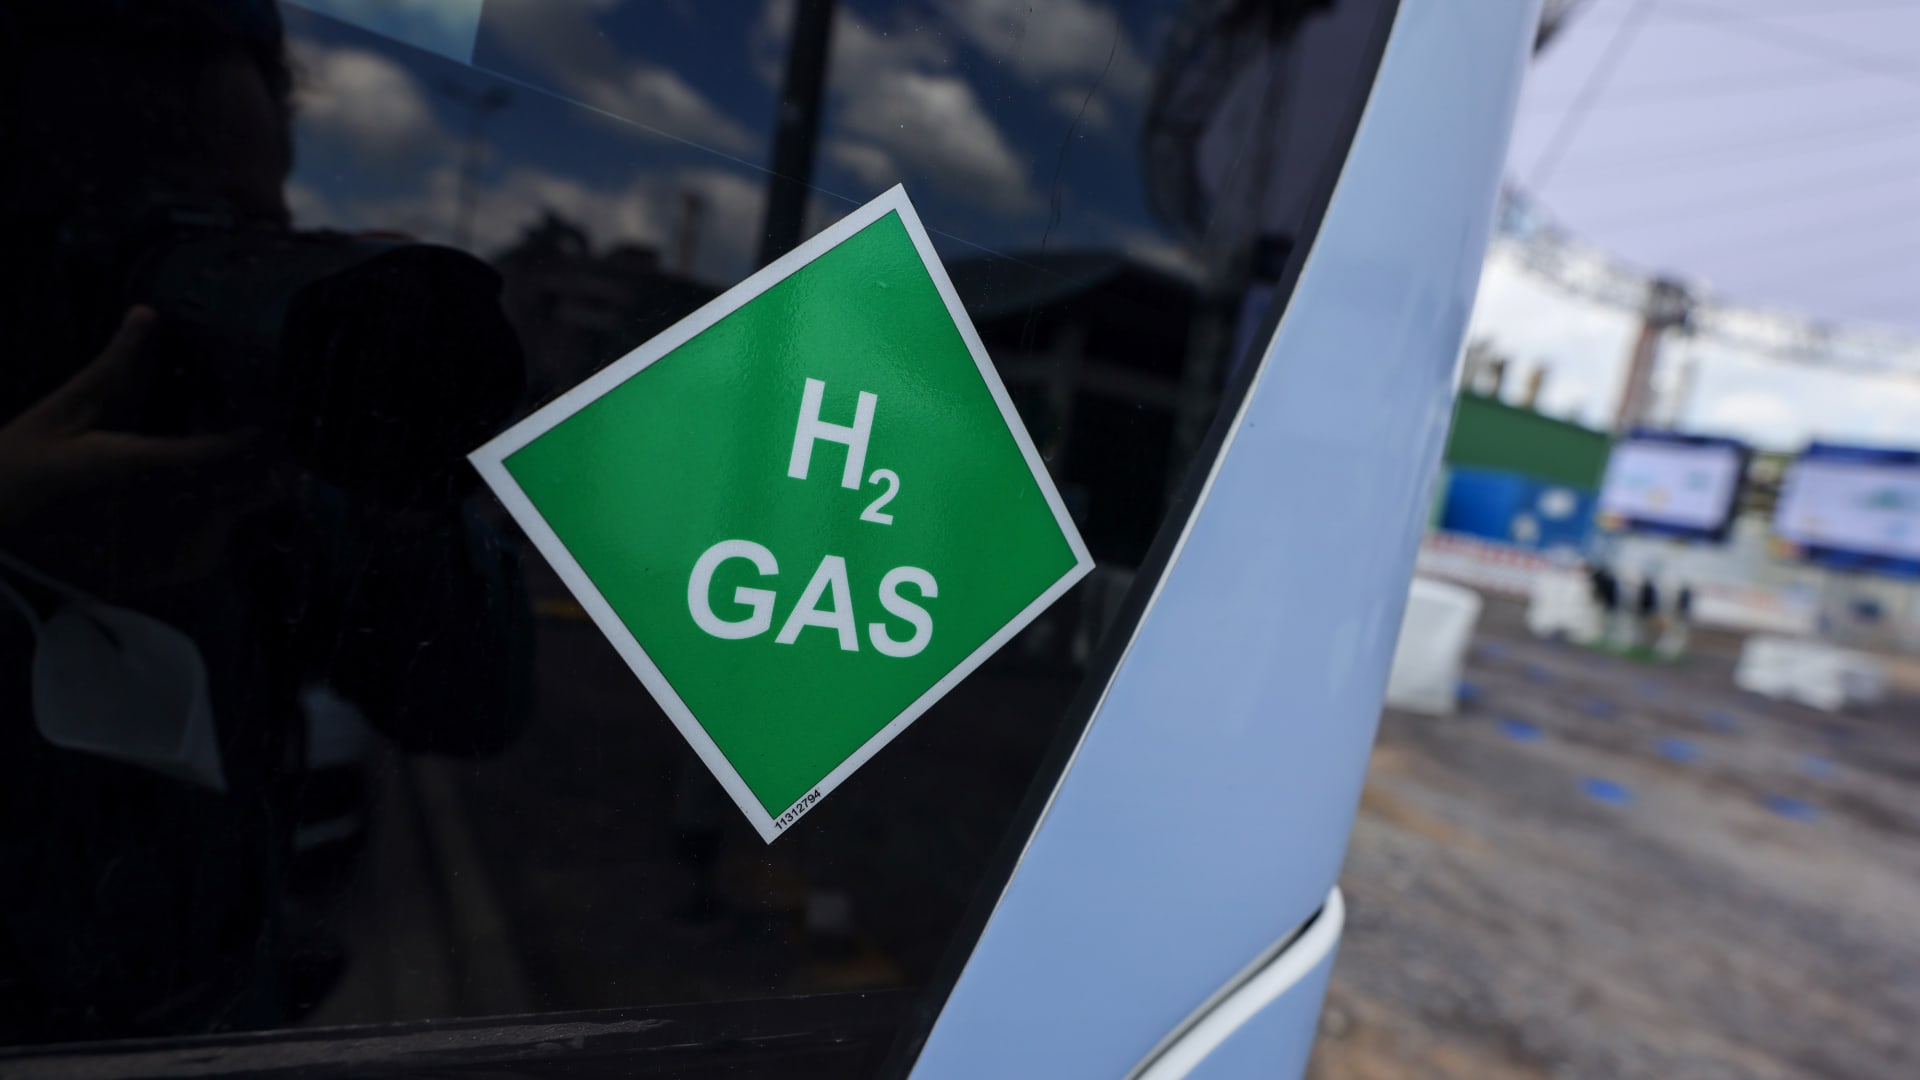 Clean hydrogen industry future depends on IRA tax credit